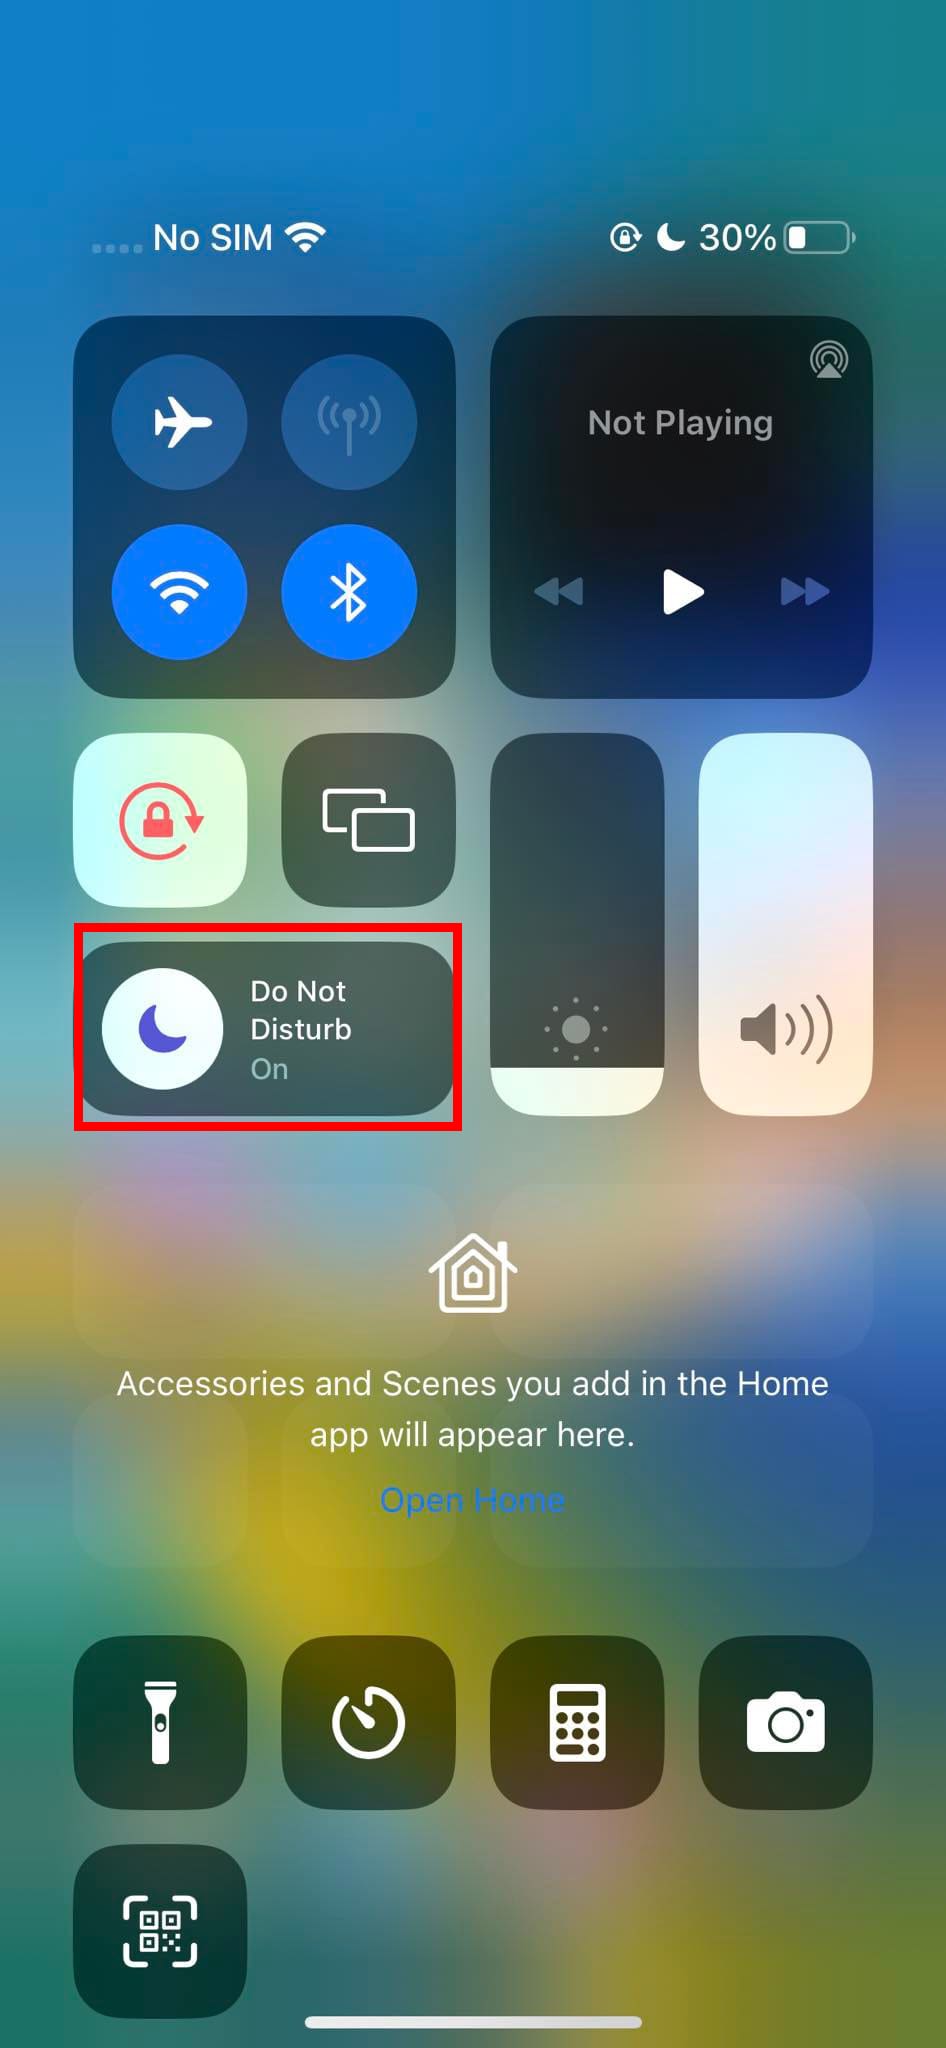 DND On on Control Center